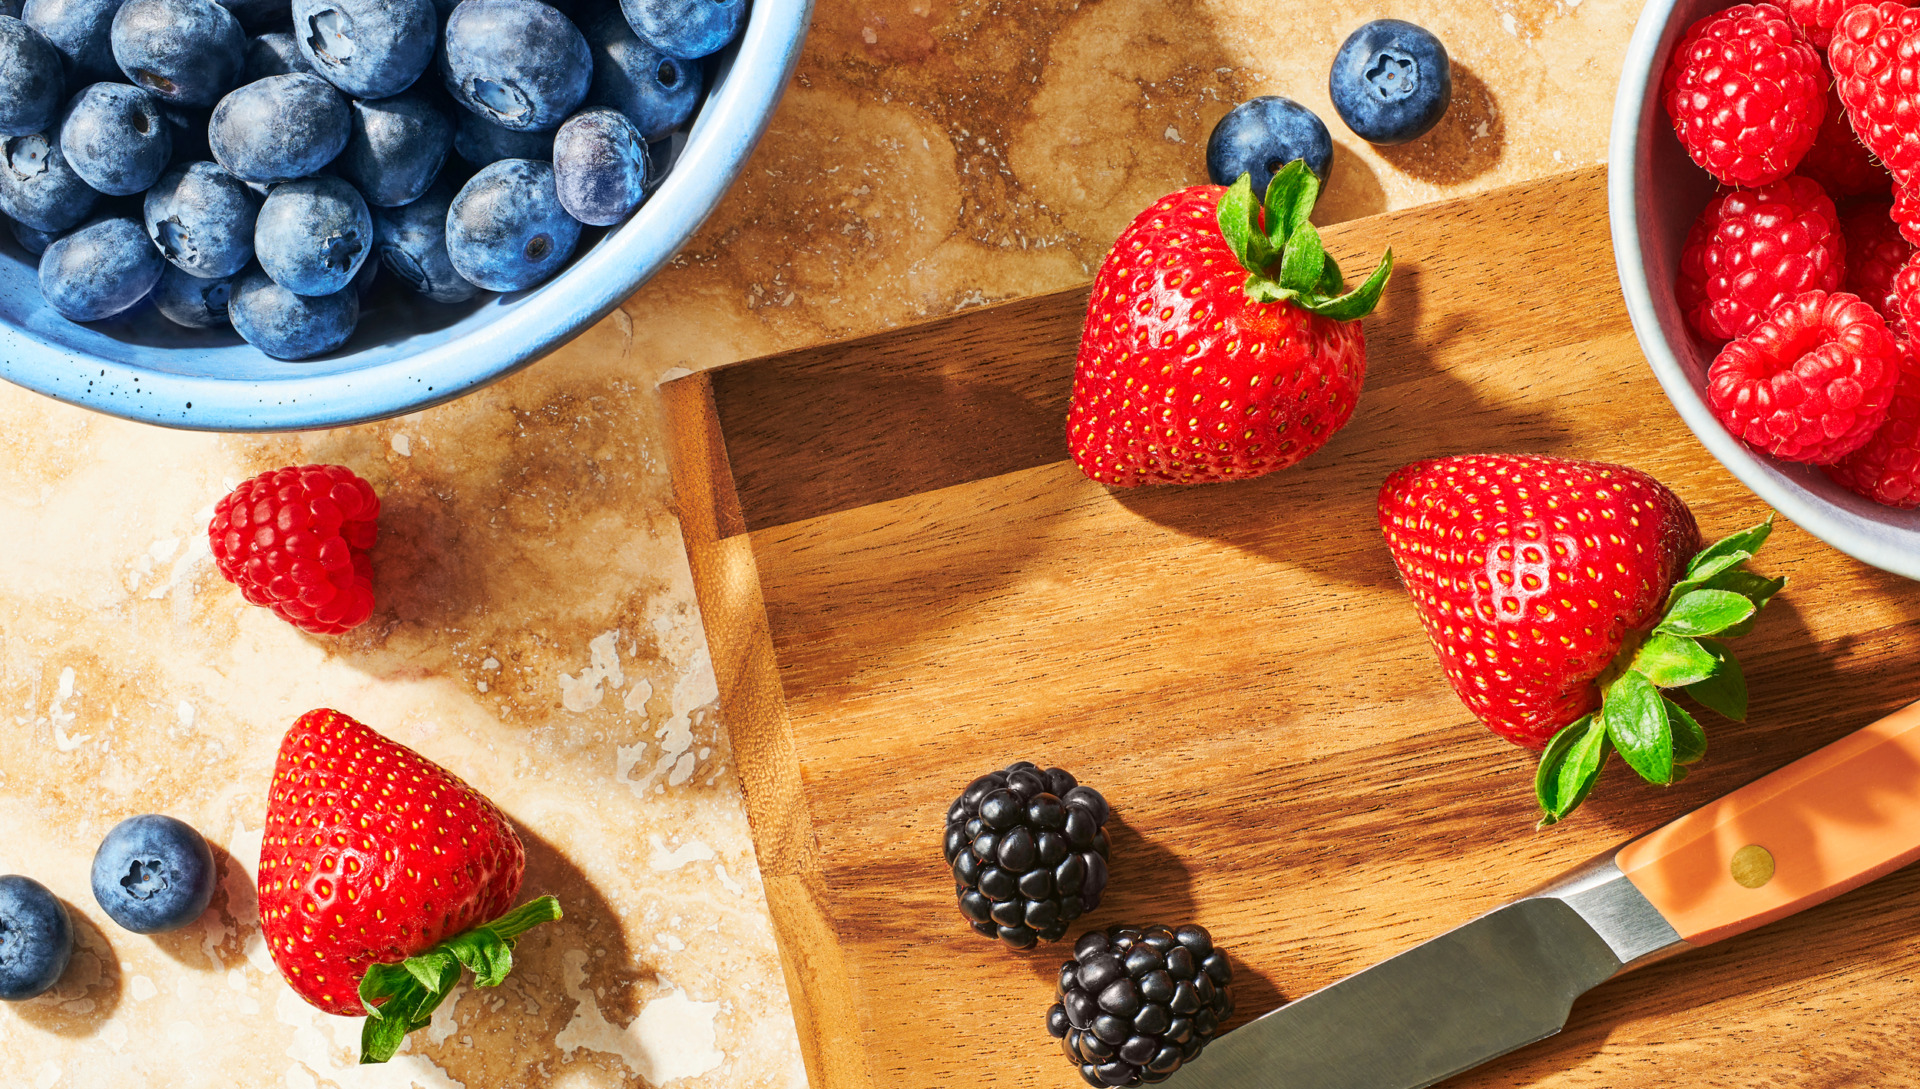 Image of a bowl of Always Fresh blueberries, a bowl of Always Fresh raspberries with strawberries, blackberries, raspberries and blueberries on a cutting board with a knife.